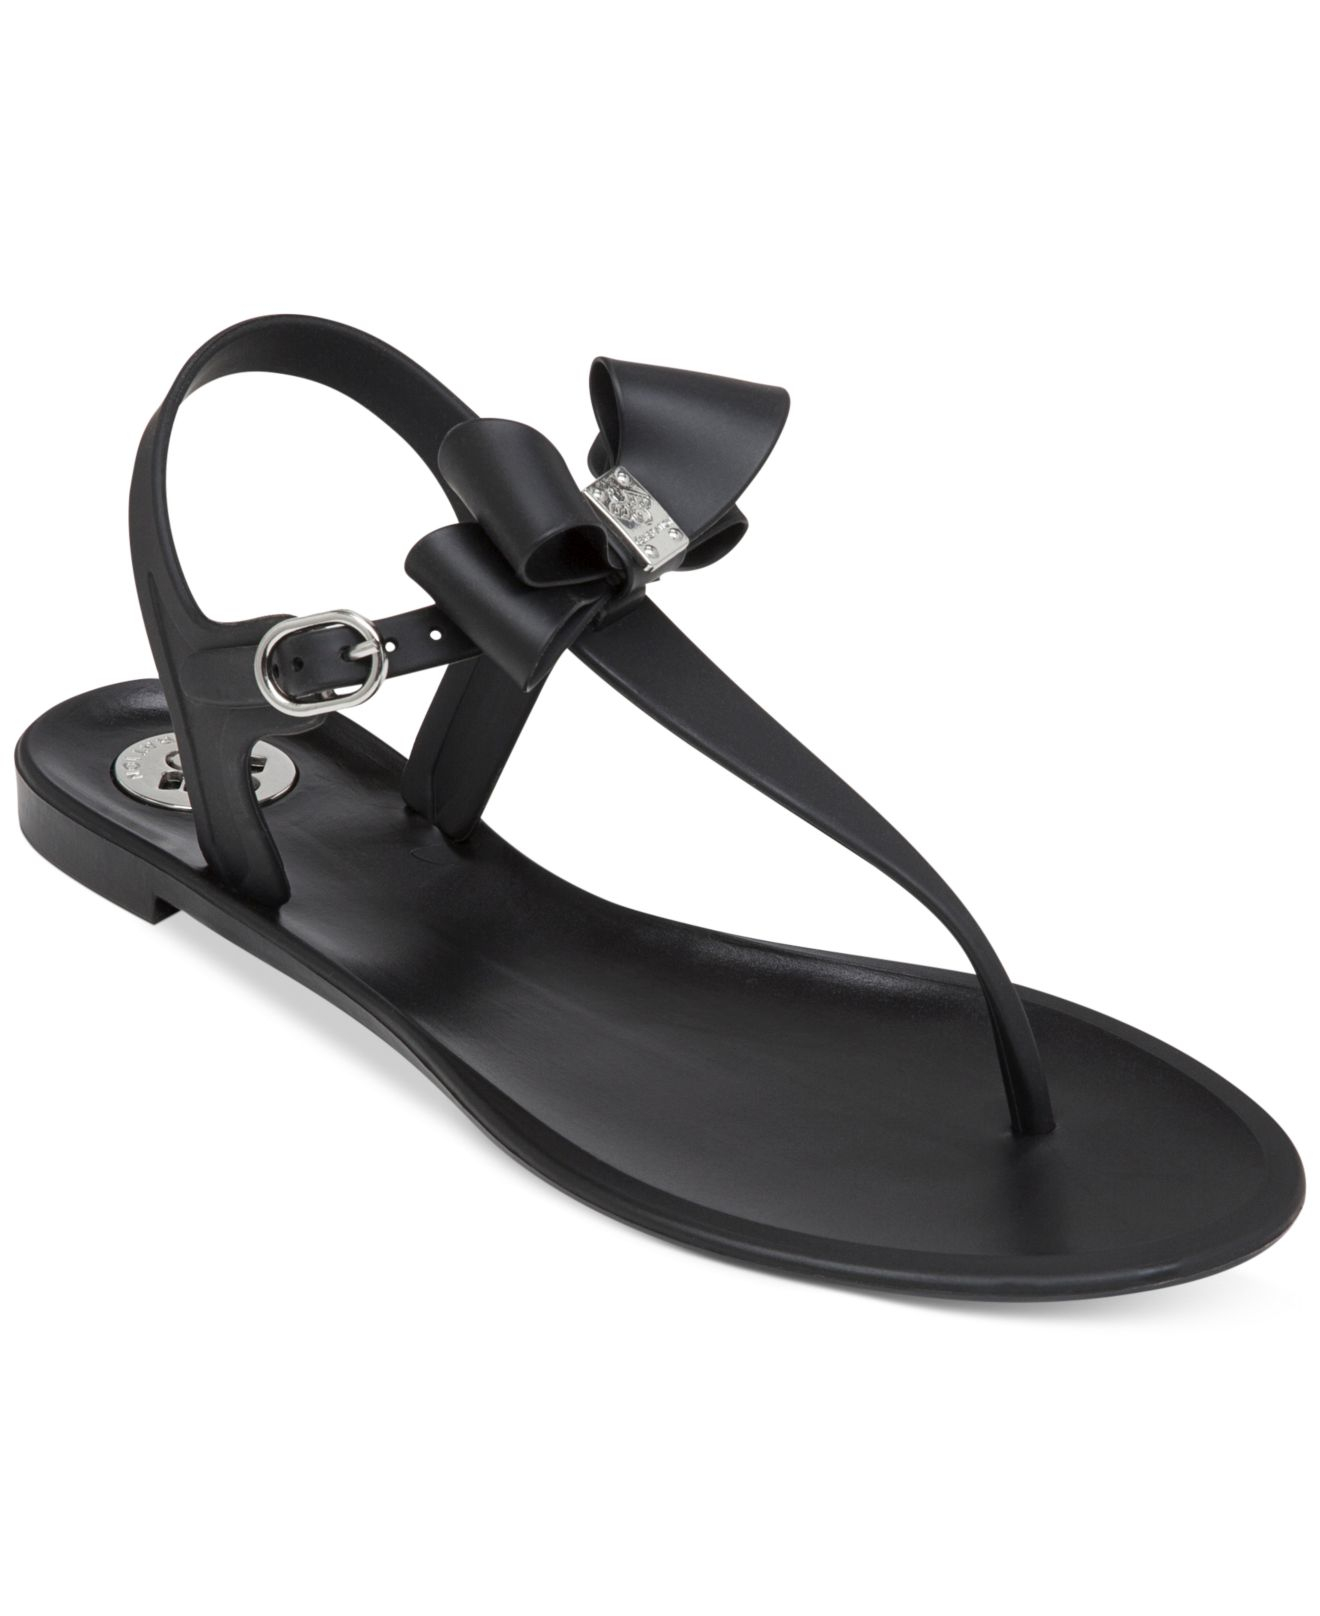 Lyst - Bcbgeneration Delightful Bow Flat Thong Sandals in Black